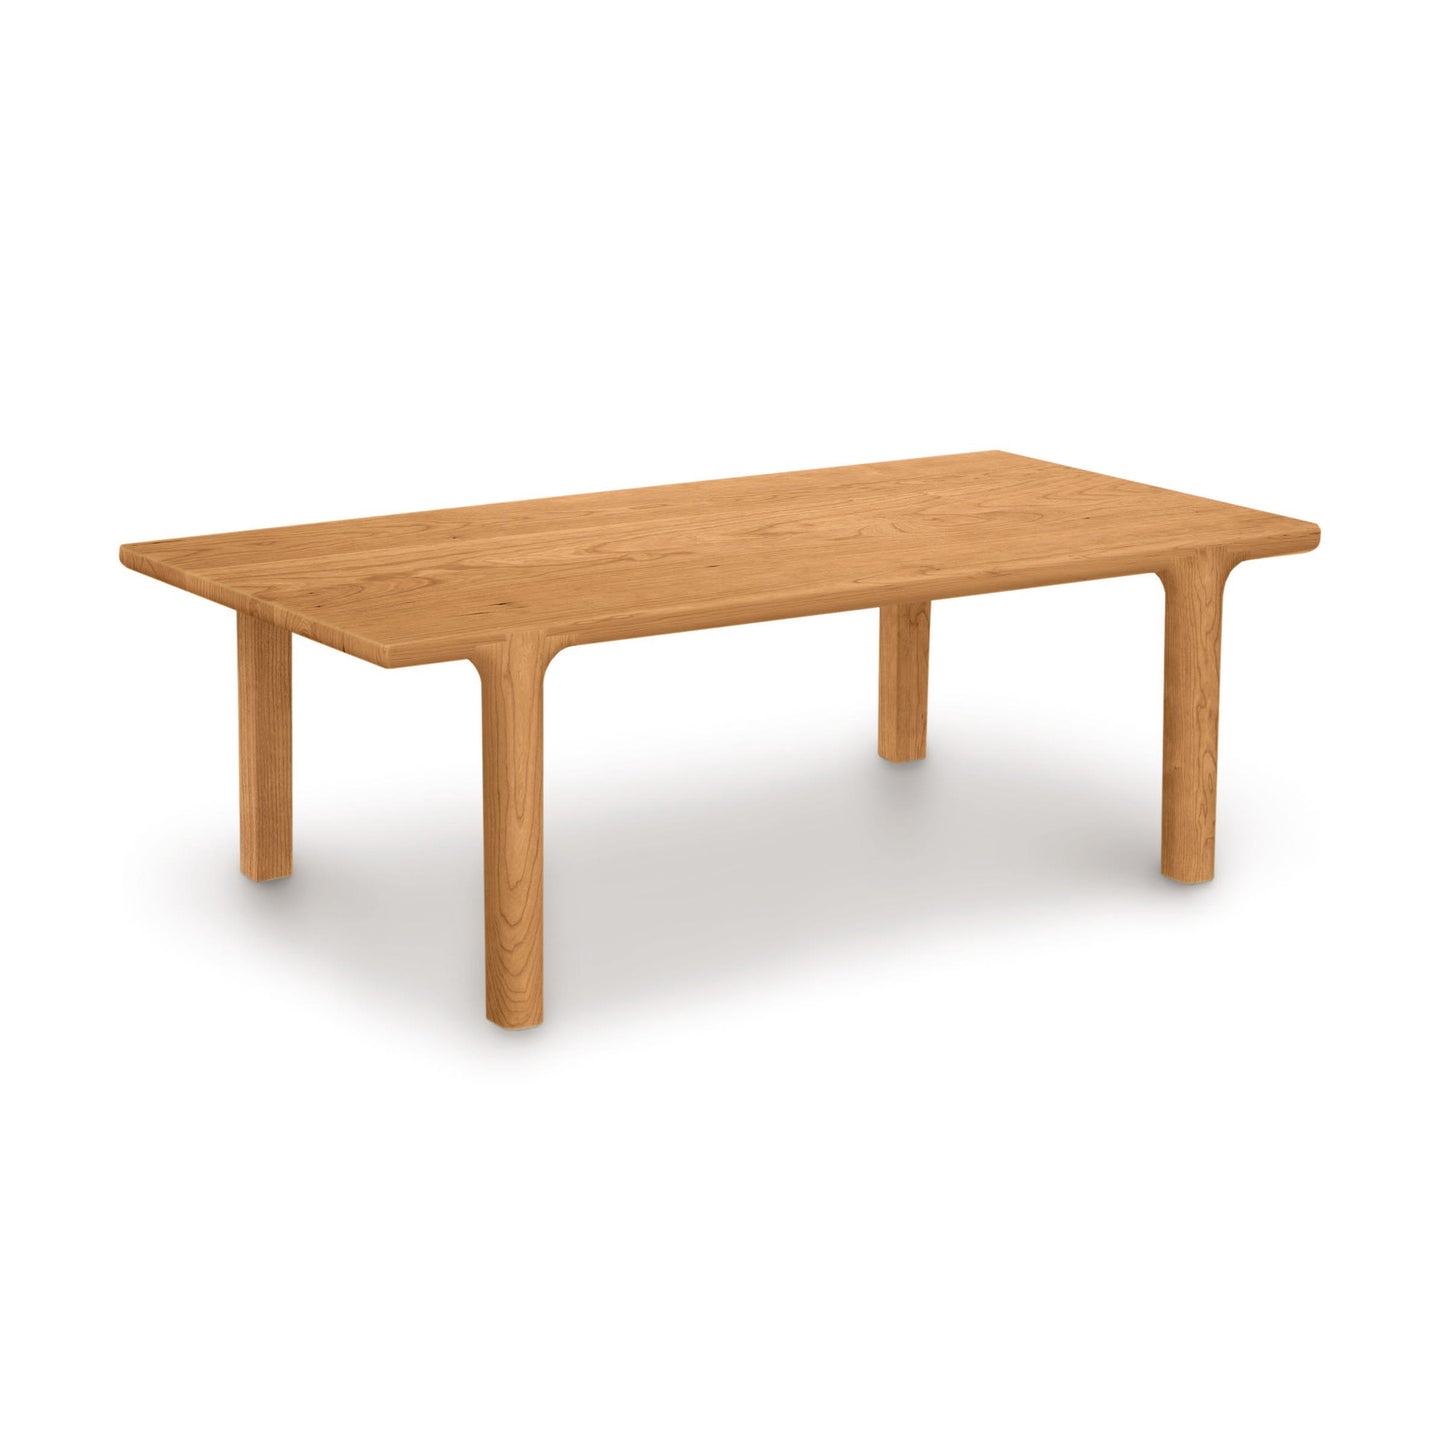 A Sierra Rectangular Coffee Table by Copeland Furniture with two legs on a white background.